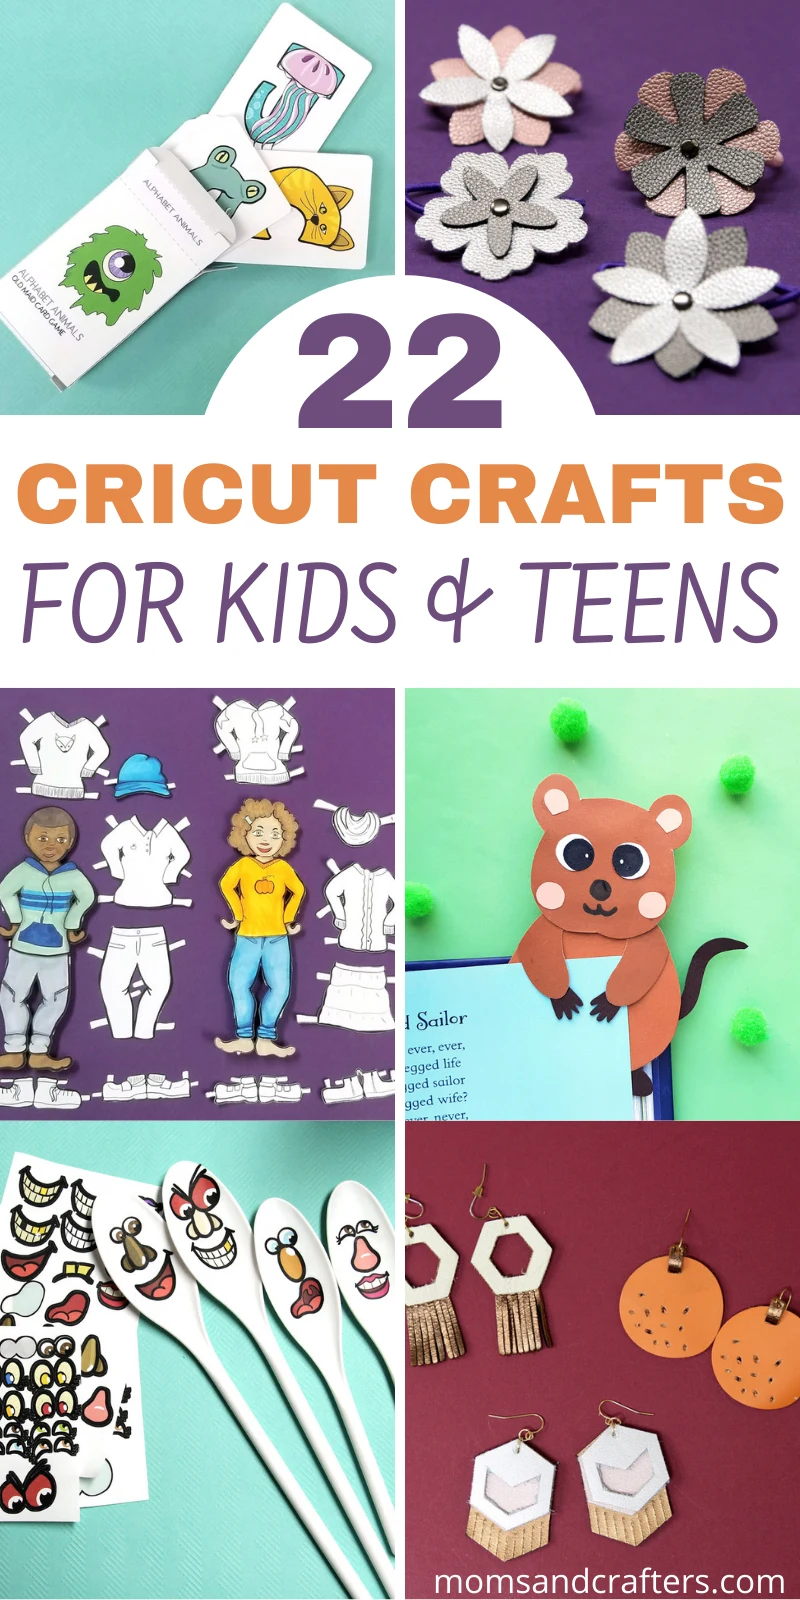 Cricut crafts for kids main collage